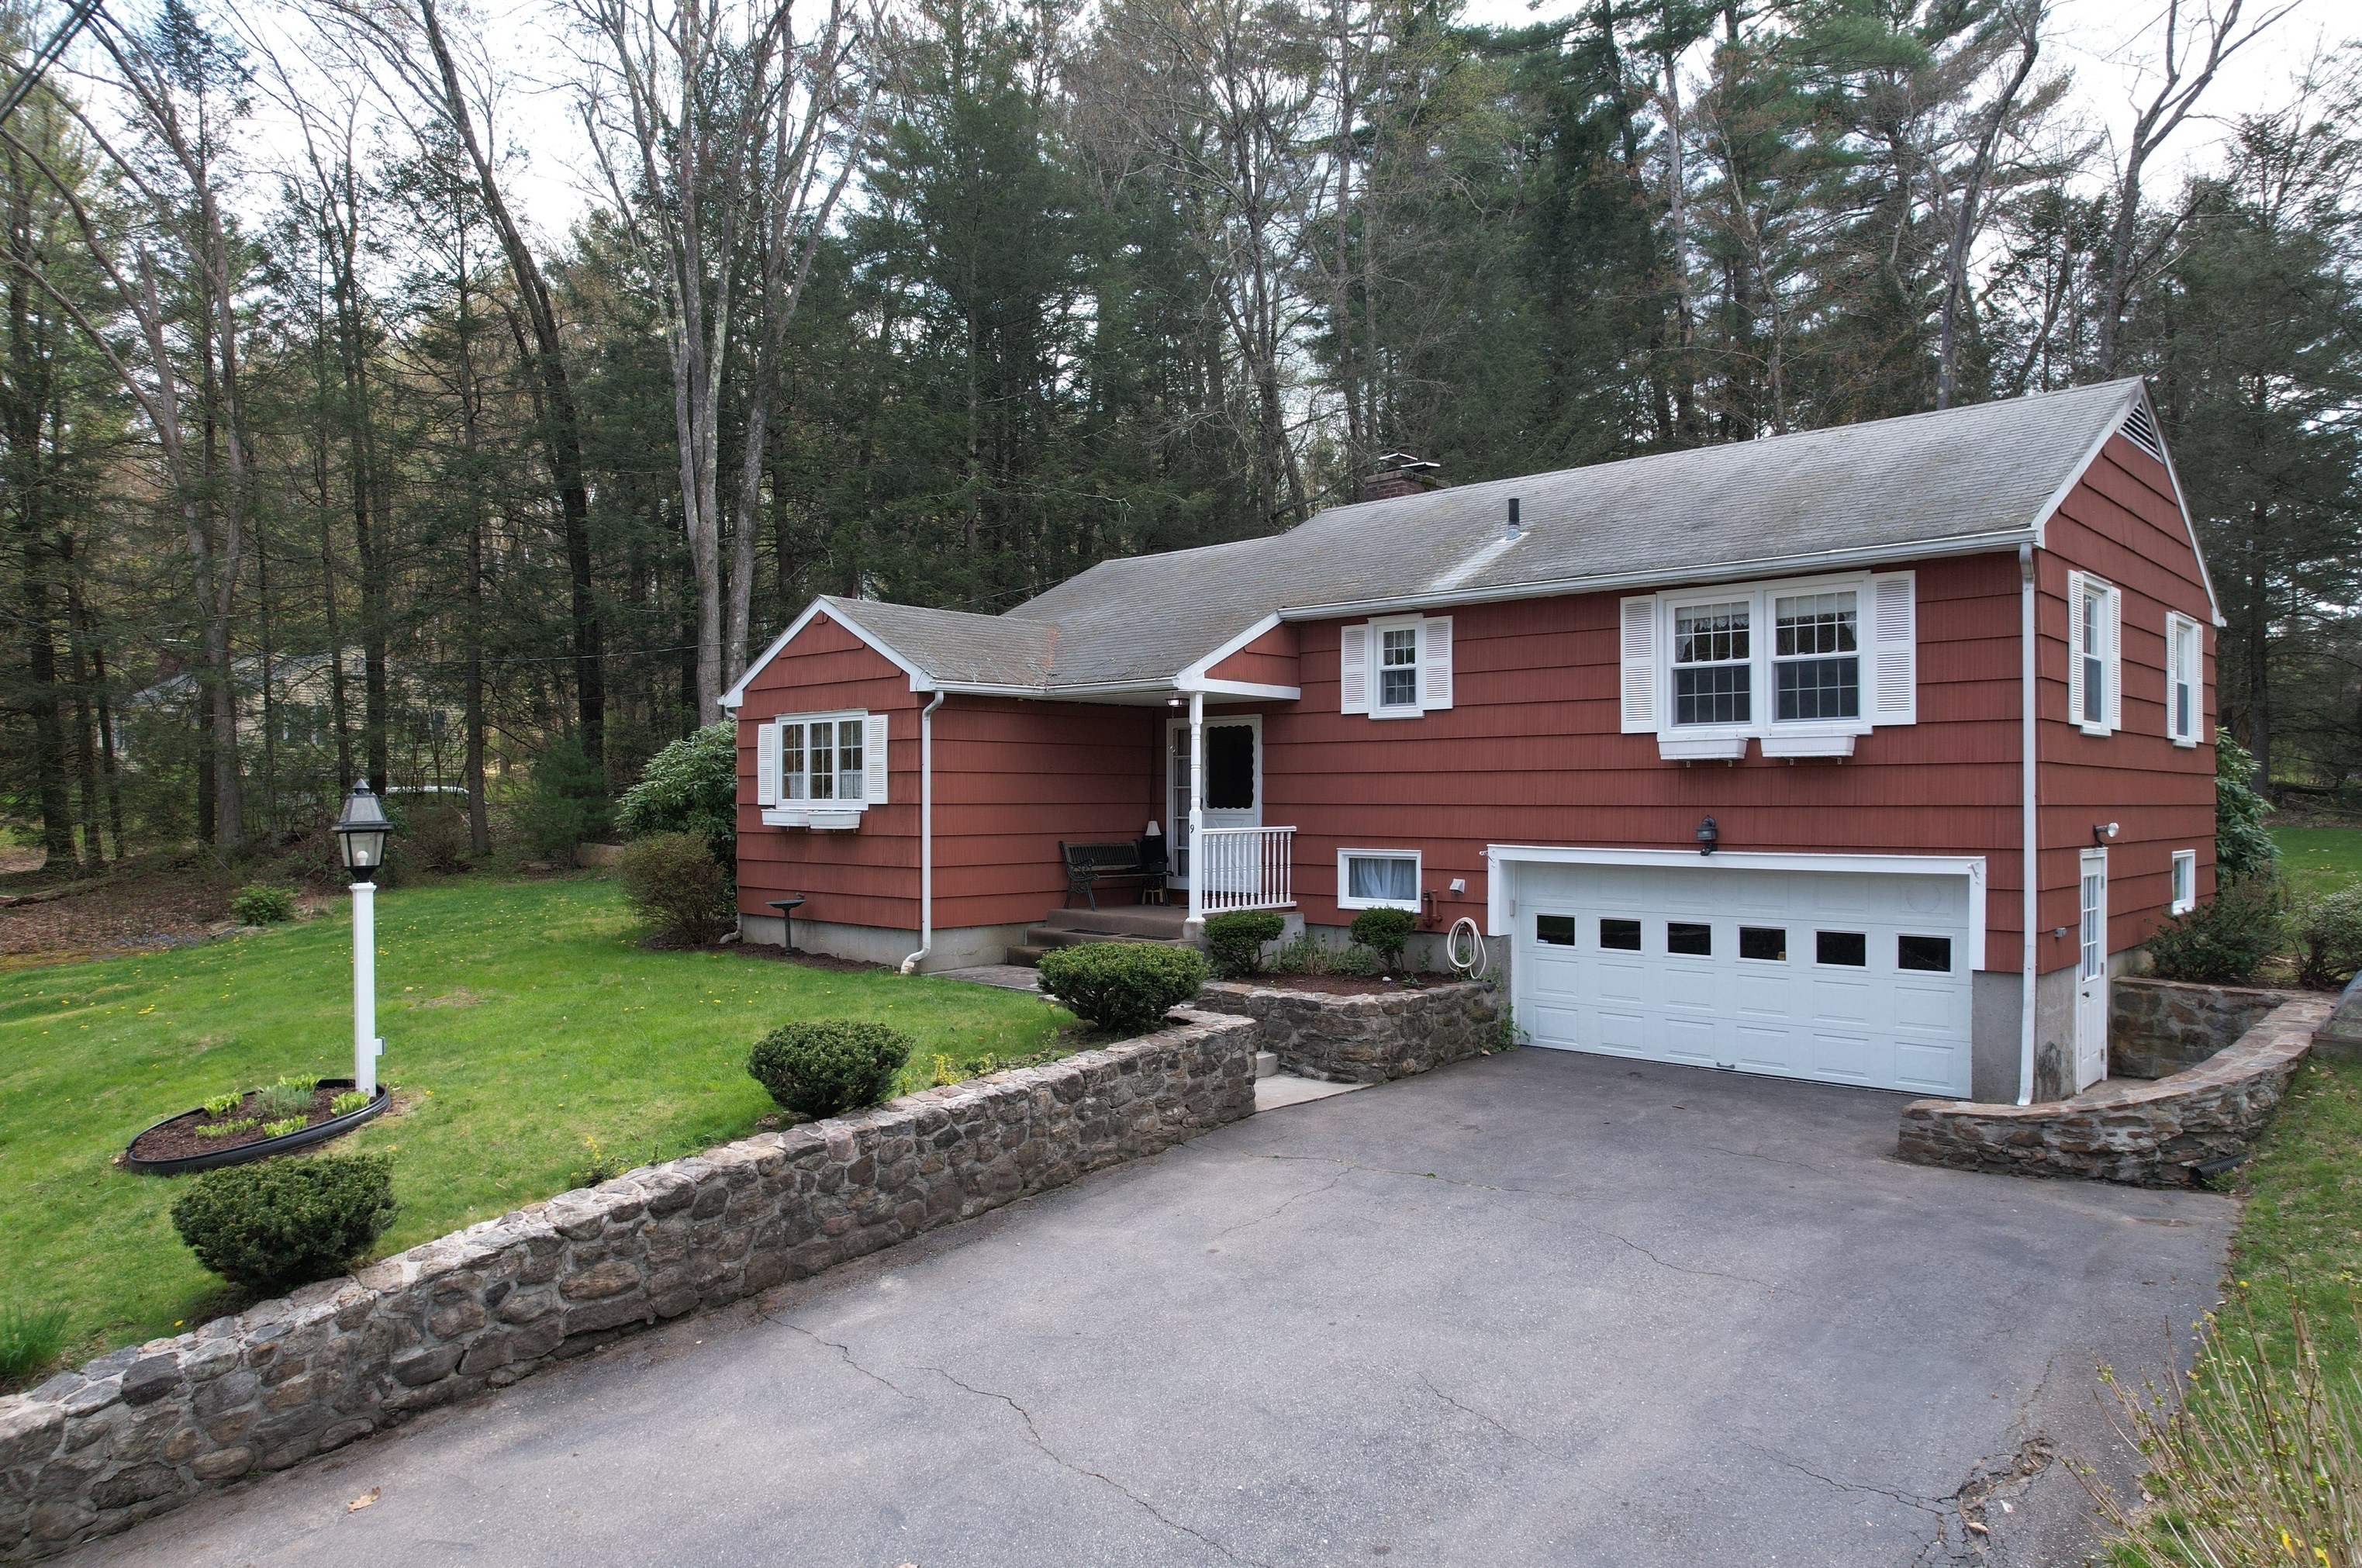 9 Raymond Dr, Winsted, CT 06063 exterior